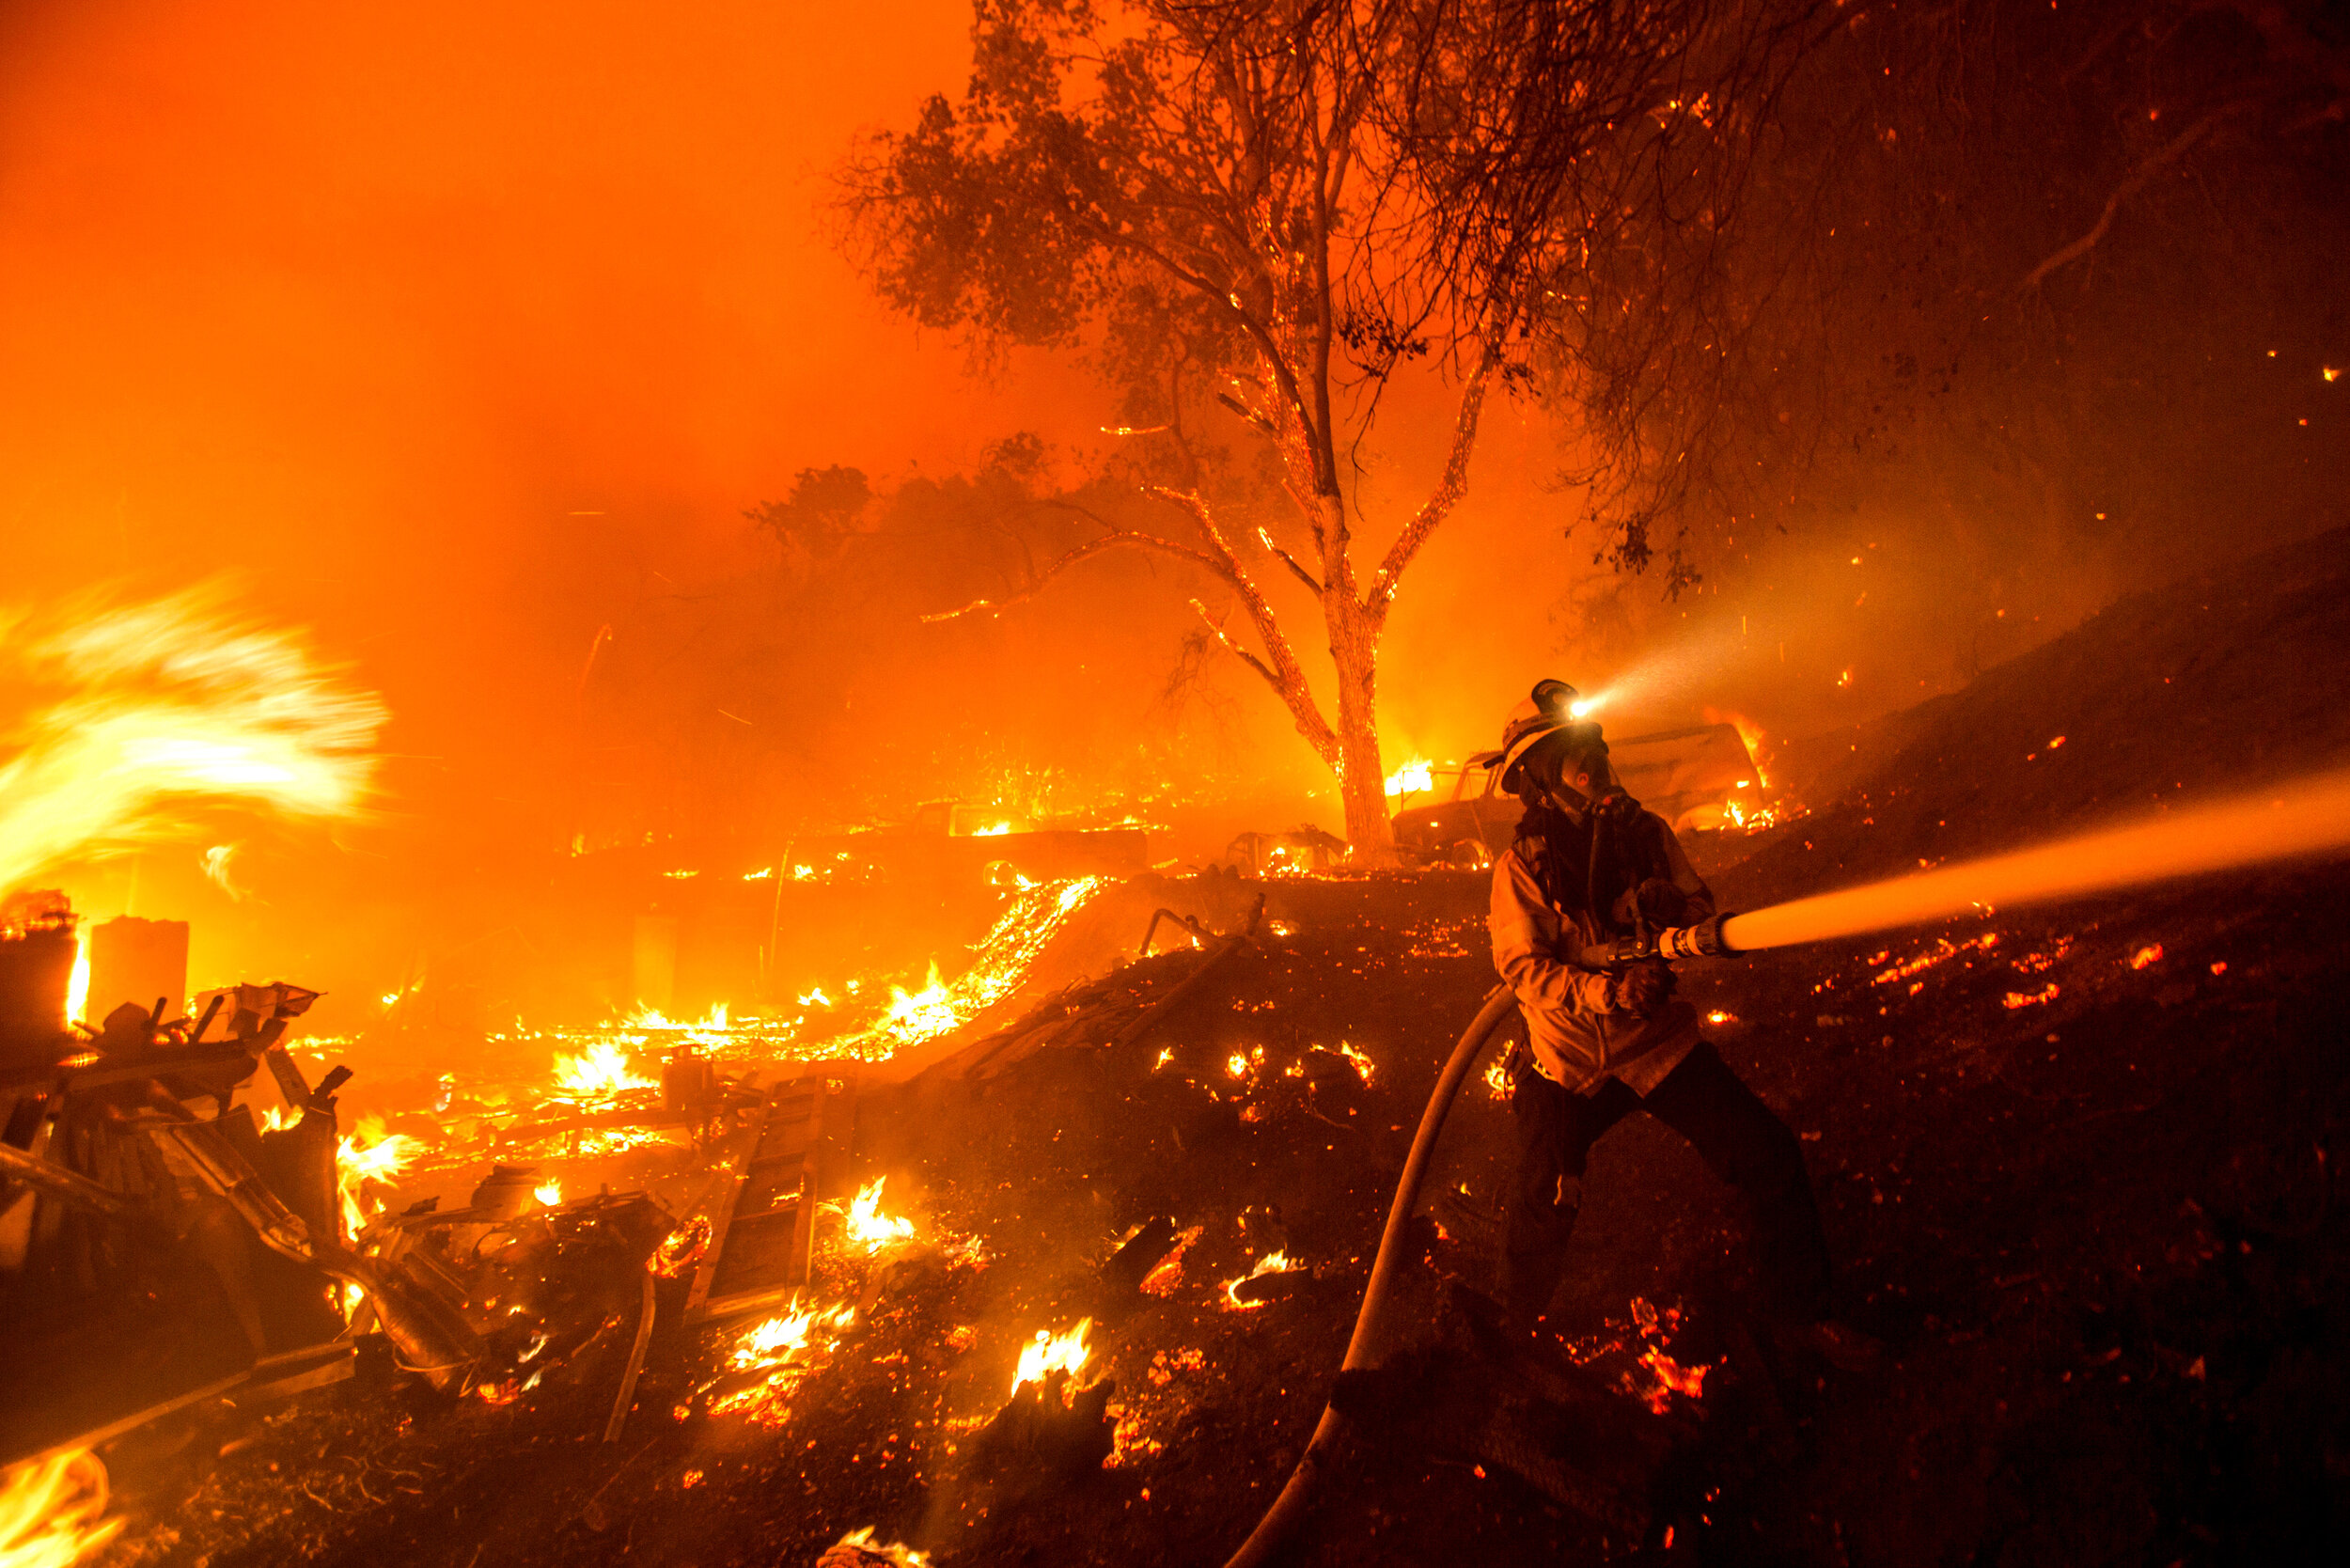  A firefighter battles the Lake Hughes fire in Angeles National Forest on Wednesday, Aug. 12, 2020, north of Santa Clarita, Calif. The 2020 California wildfire season was characterized by a record-setting year of wildfires that burned across the stat